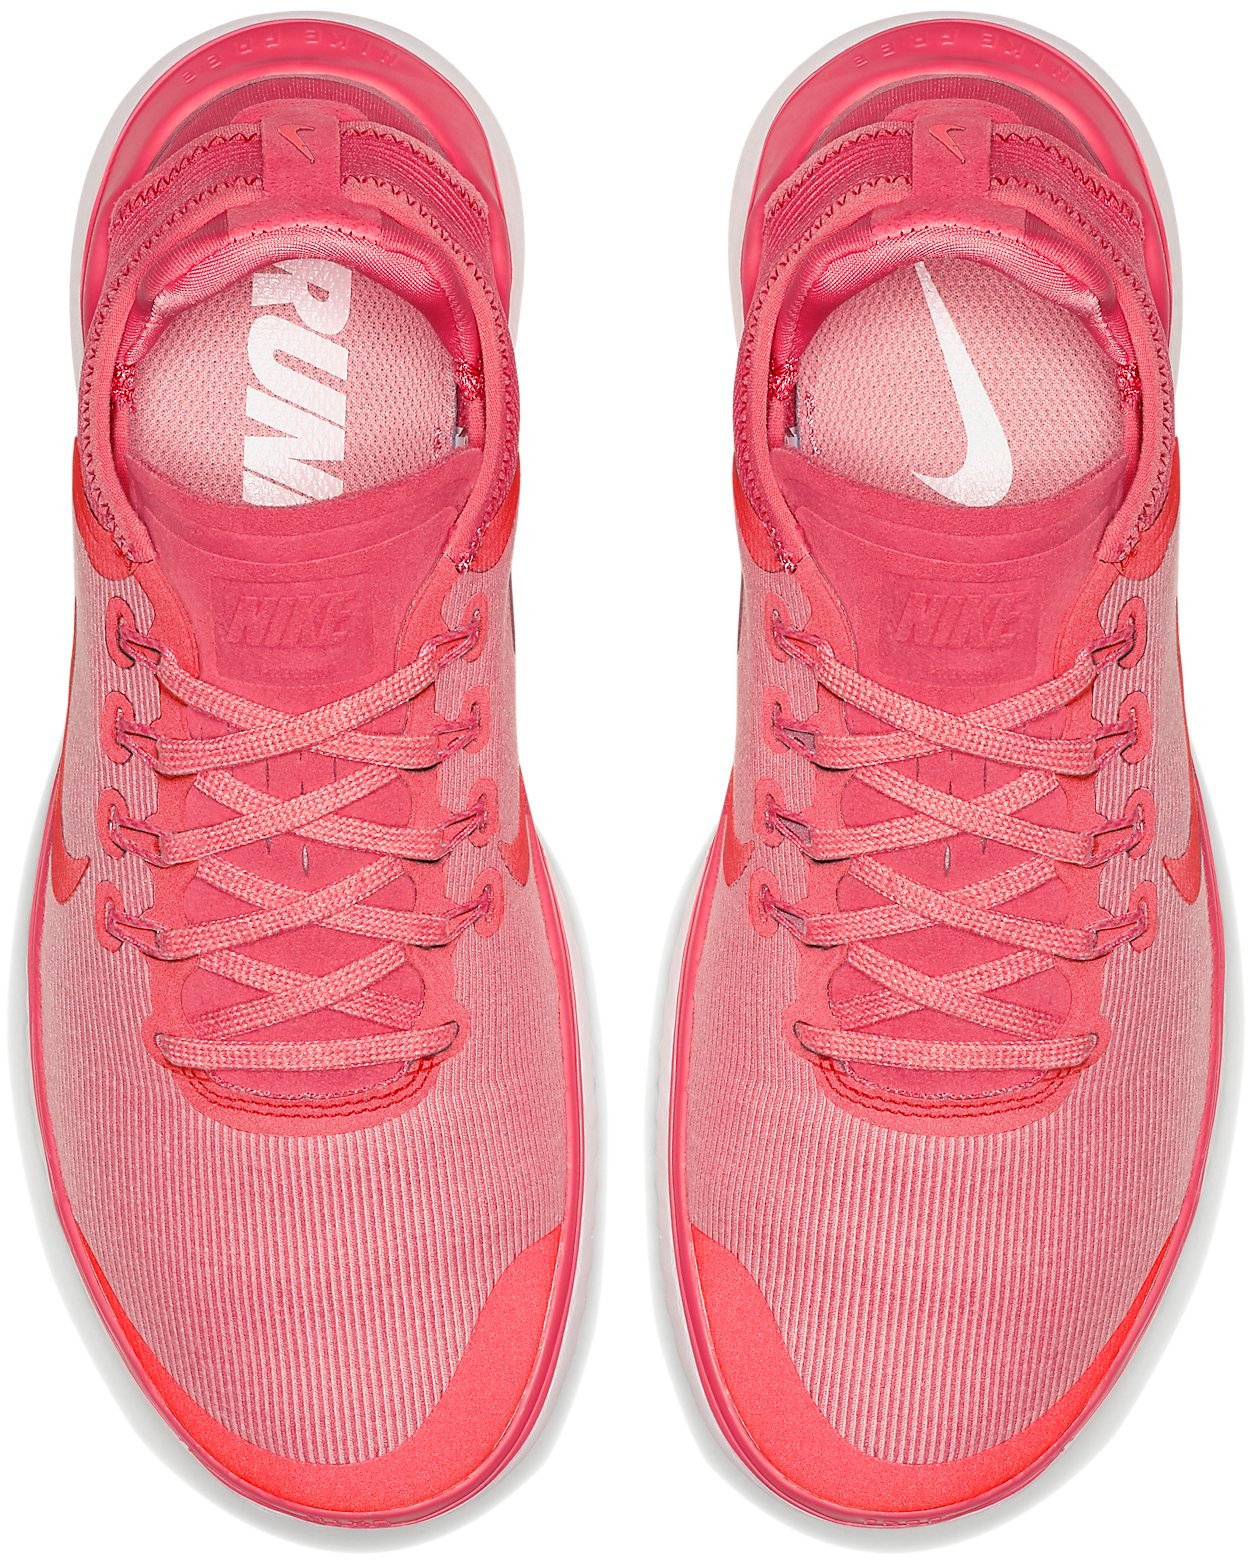 Running shoes Nike WMNS FREE RN 2018 